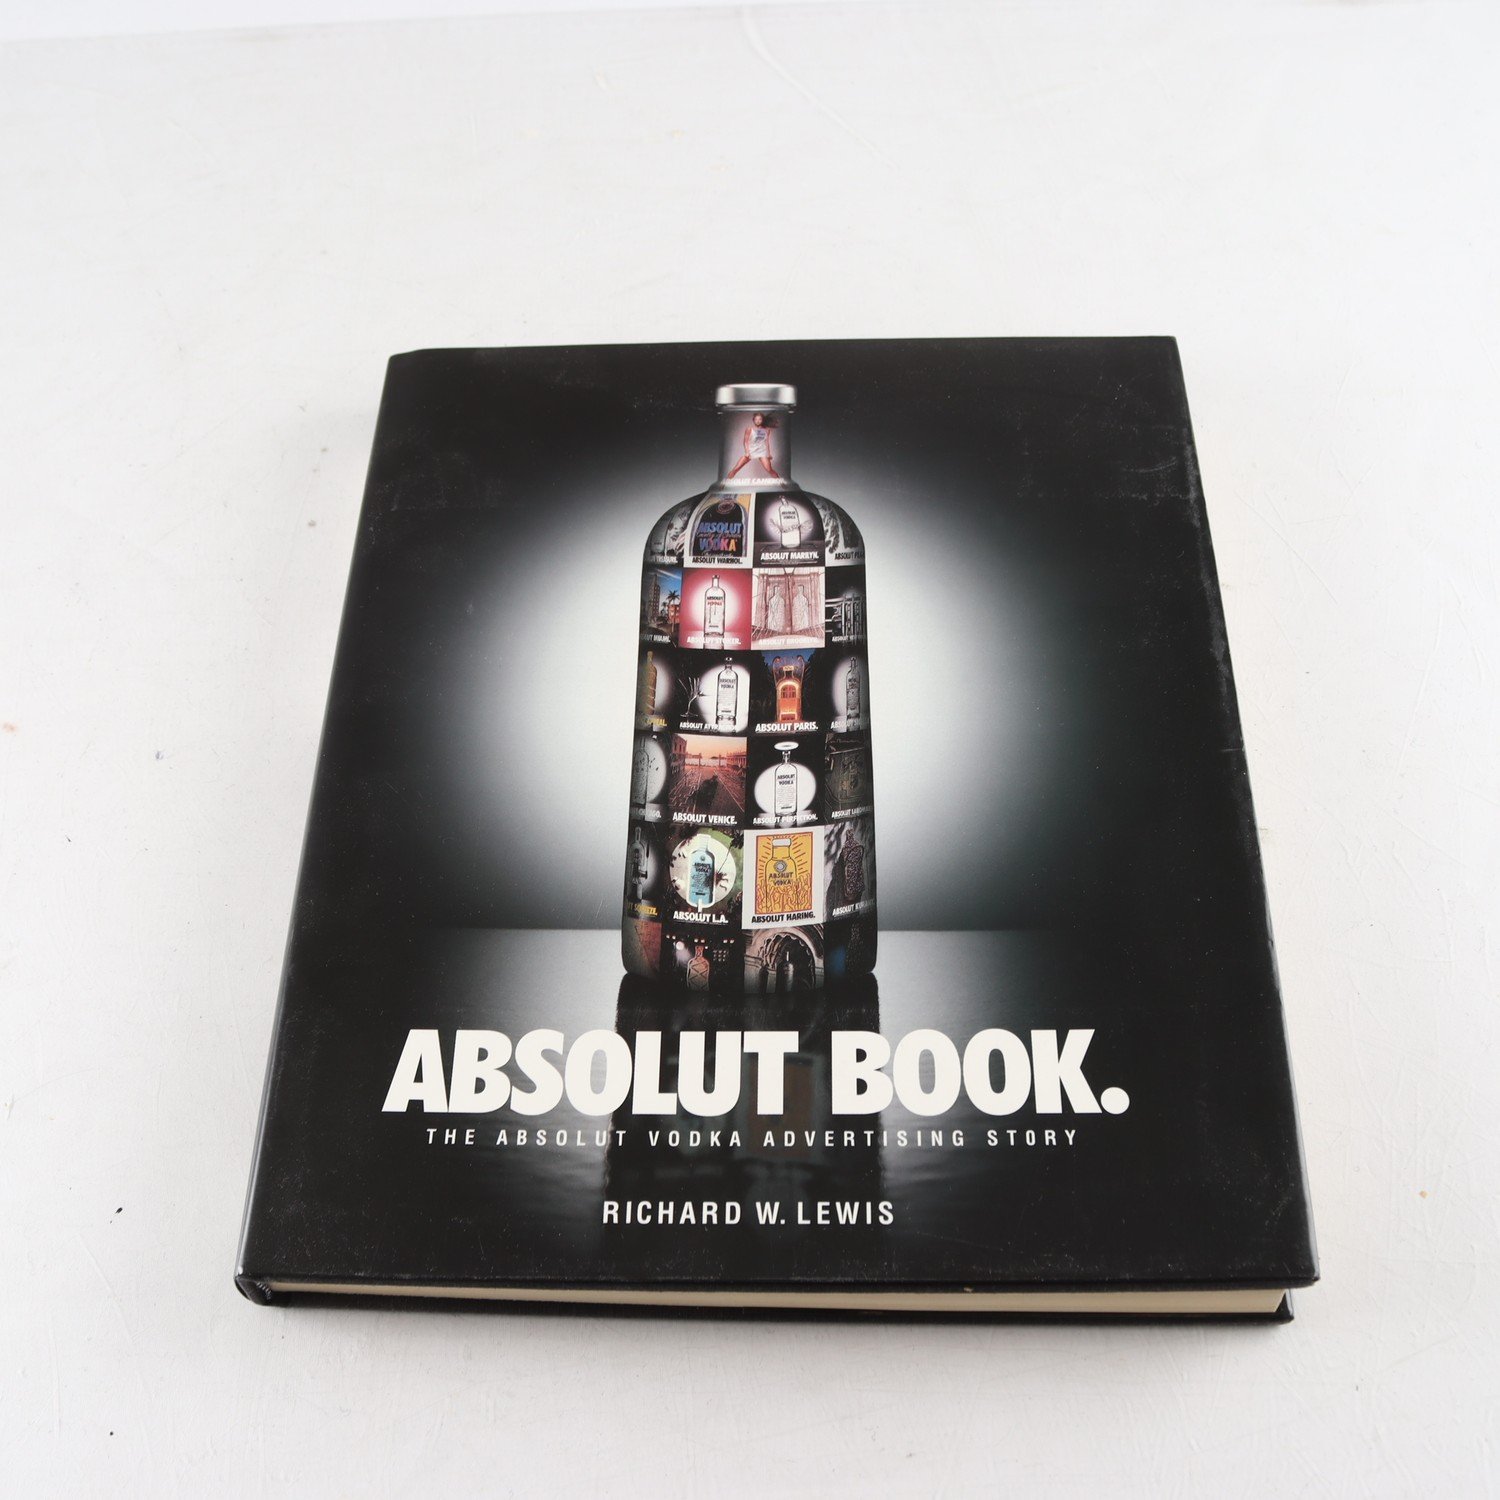 Absolut Book, The Absolut Vodka Advertising Story